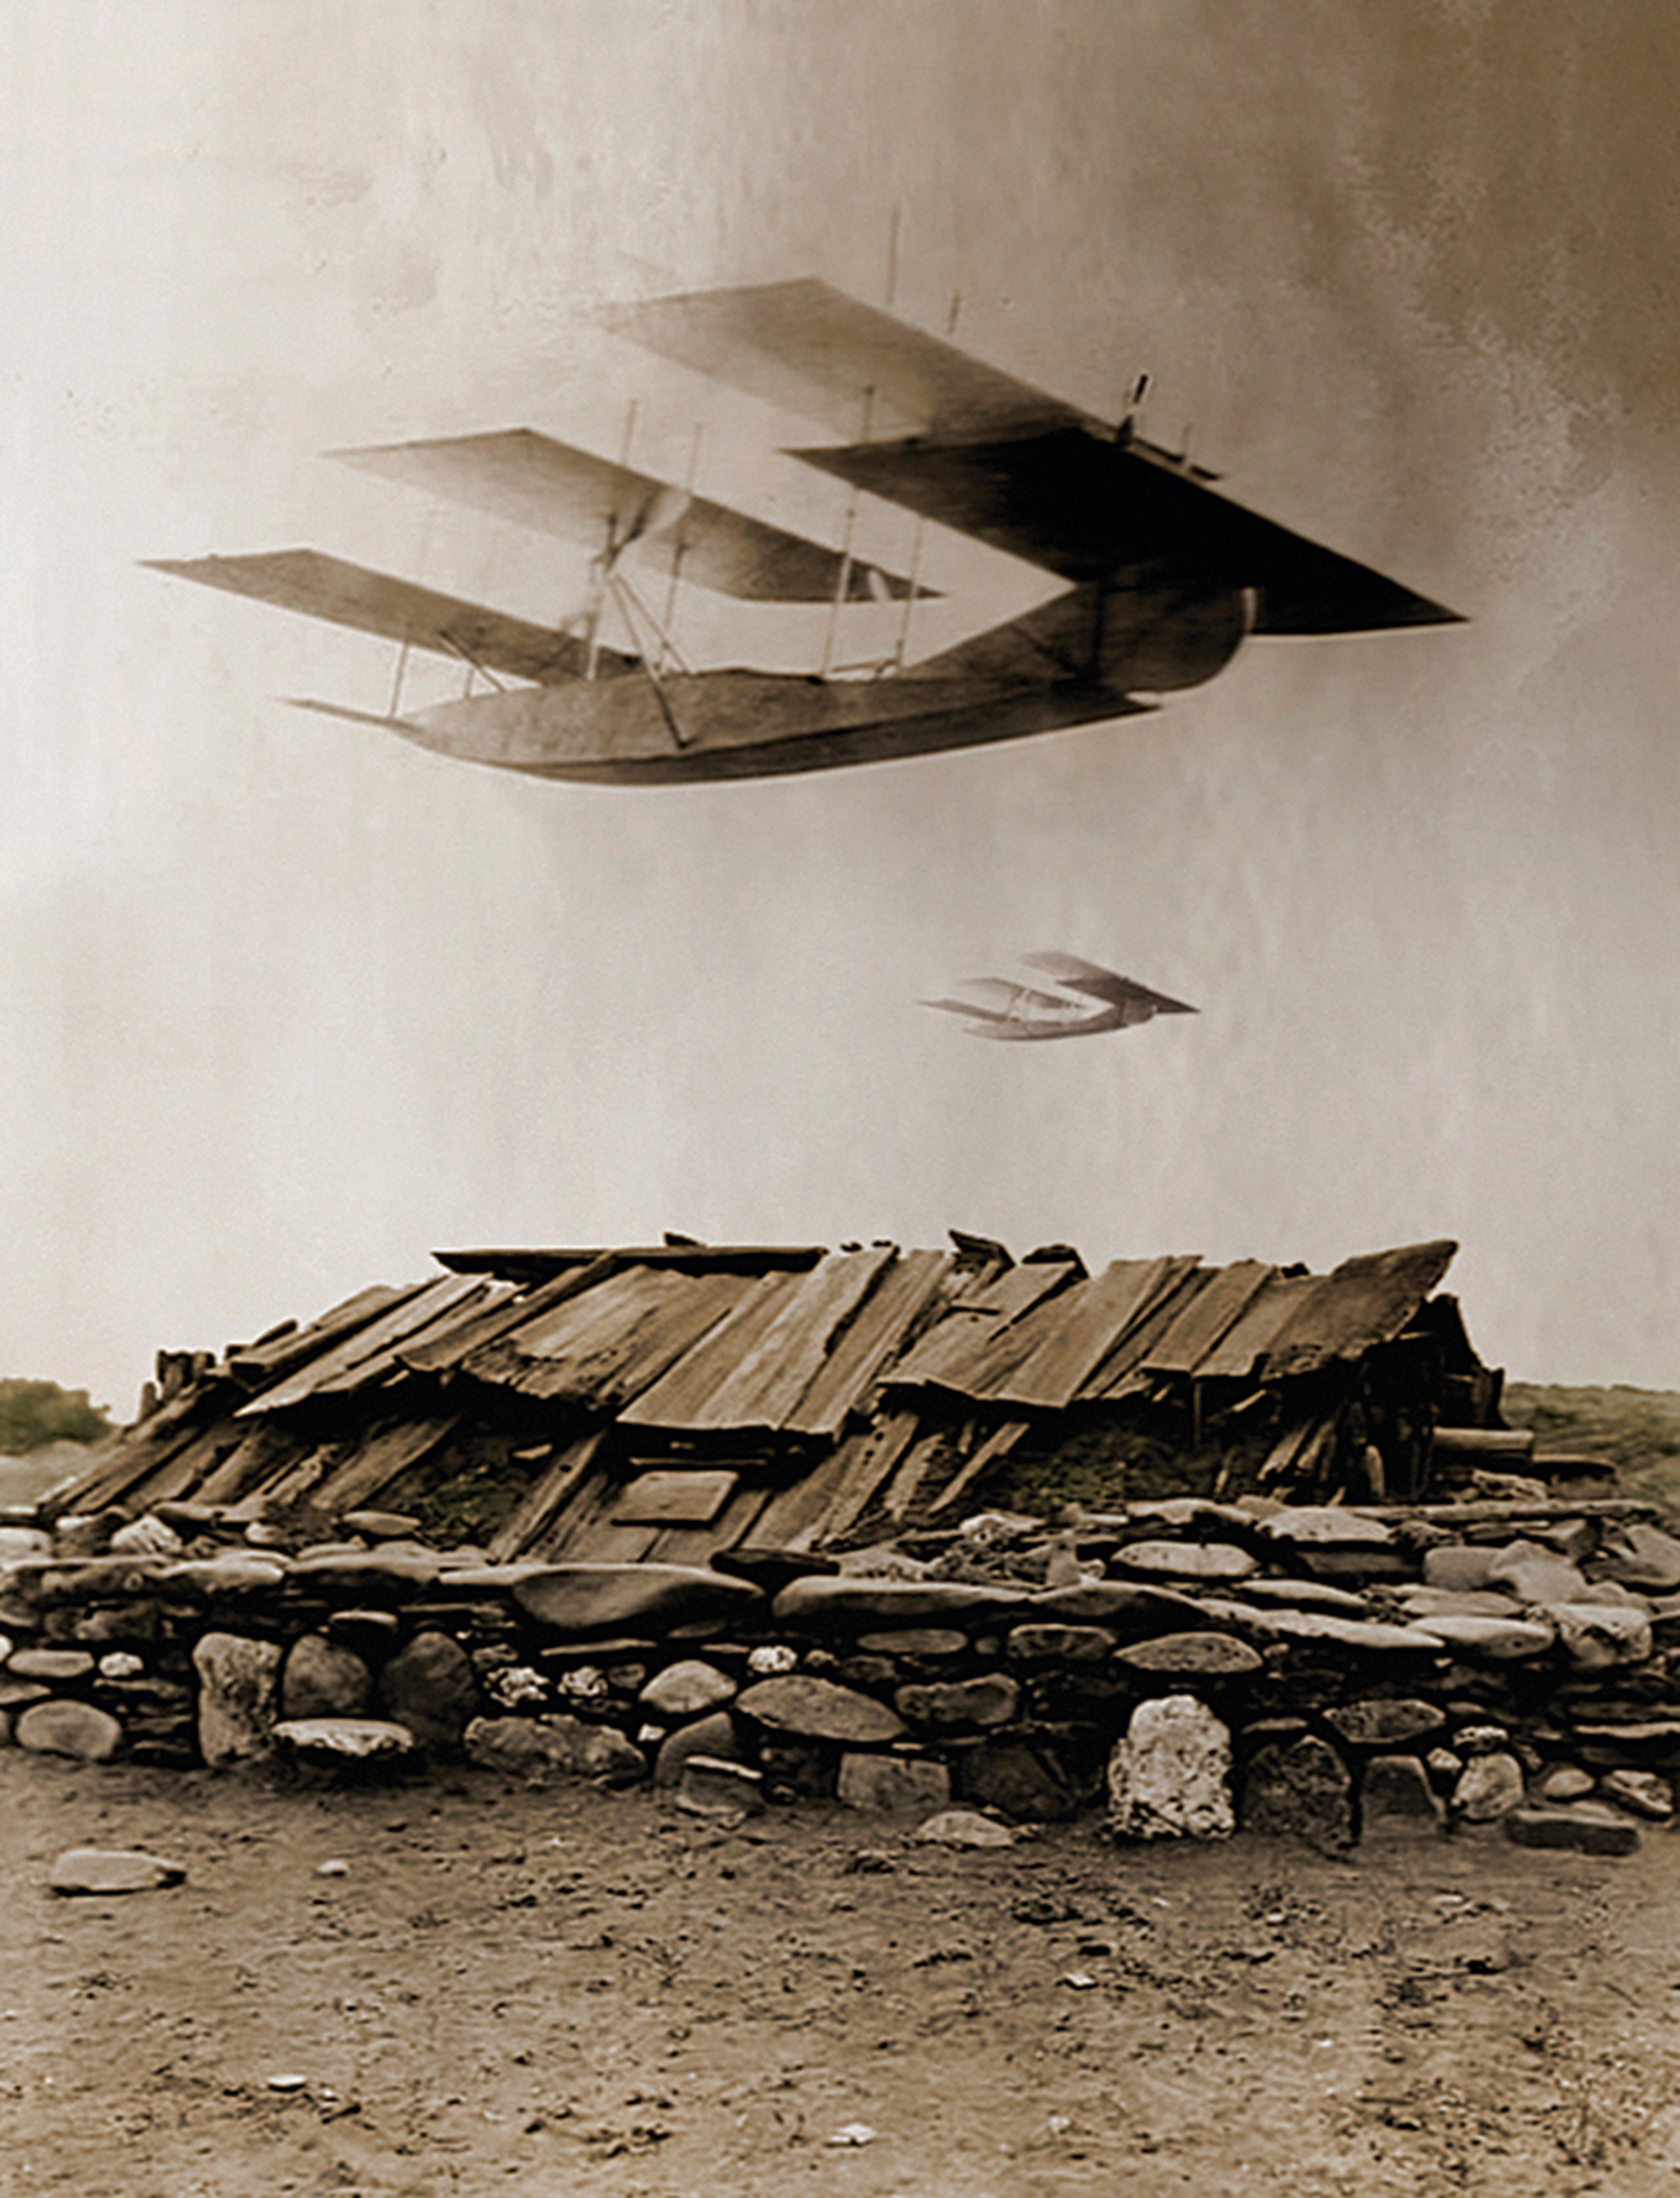 Oliver Wasow’s two thousand and nine artwork “Planes over Sweathouse.” It depicts some kind of three-winged plane over a wooden sweatlodge.